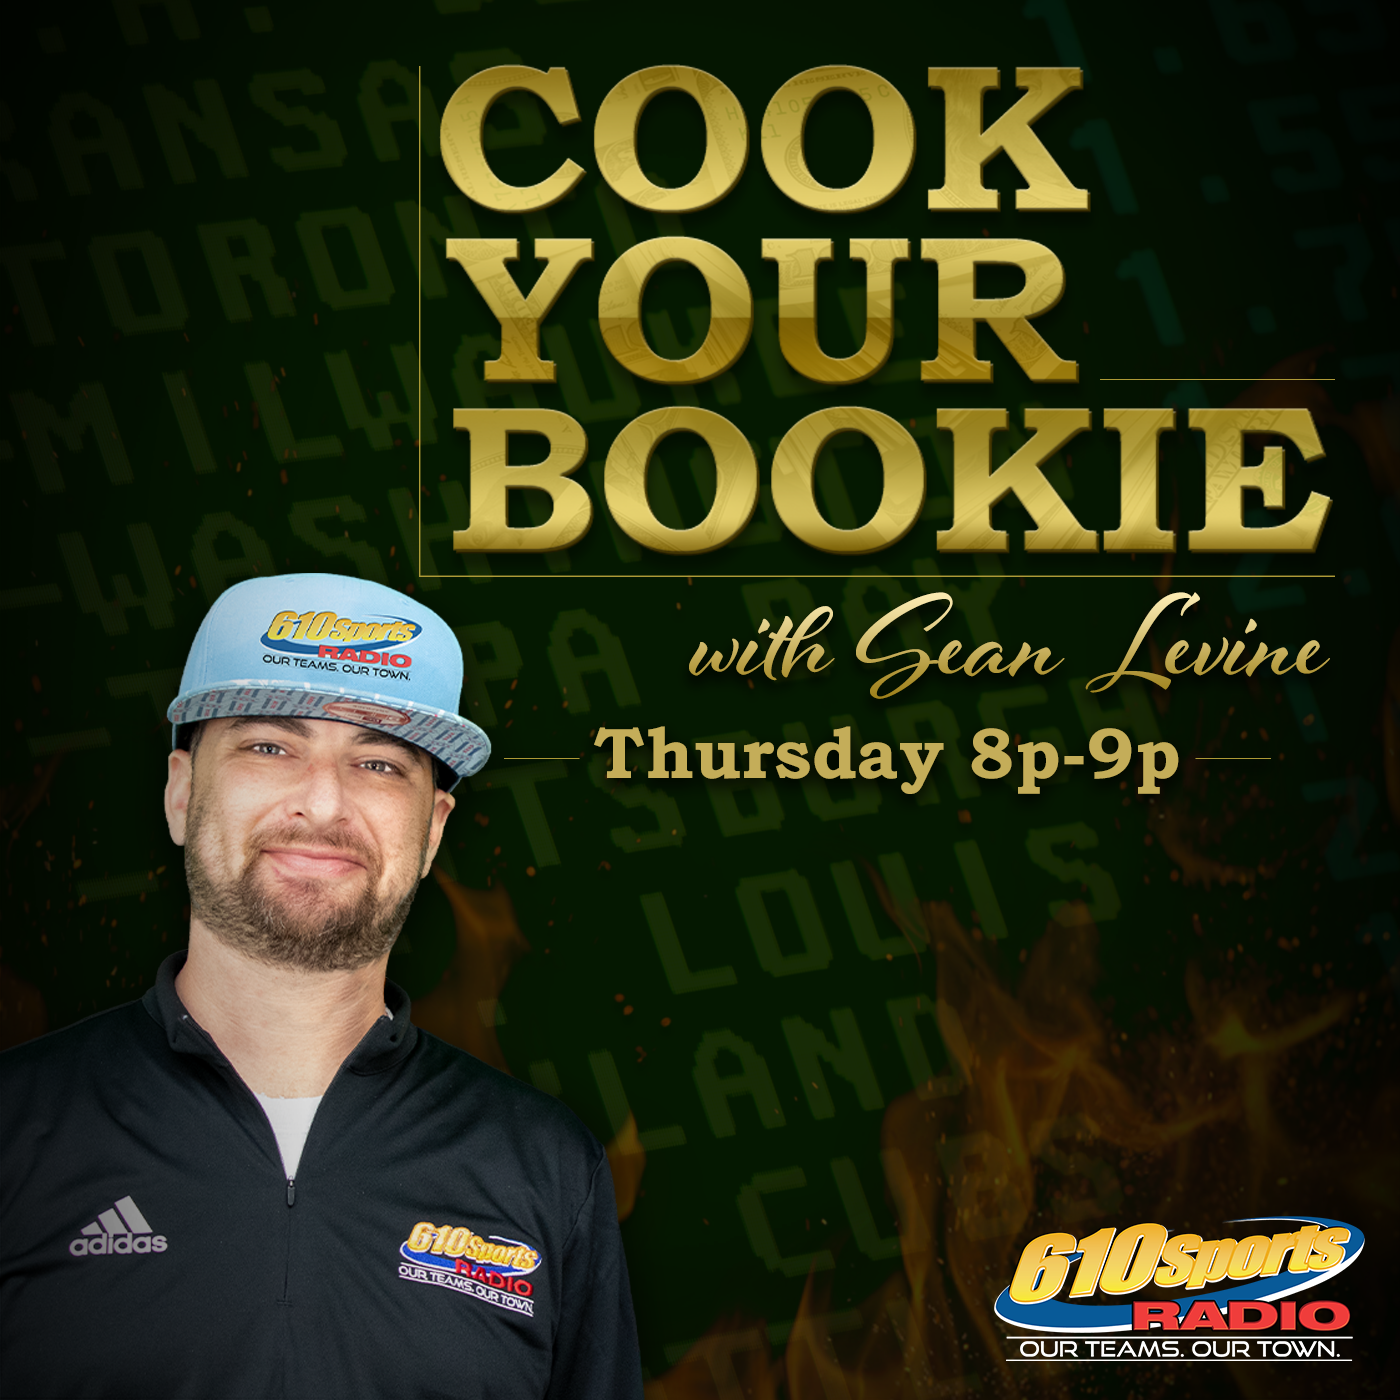 Cook Your Bookie